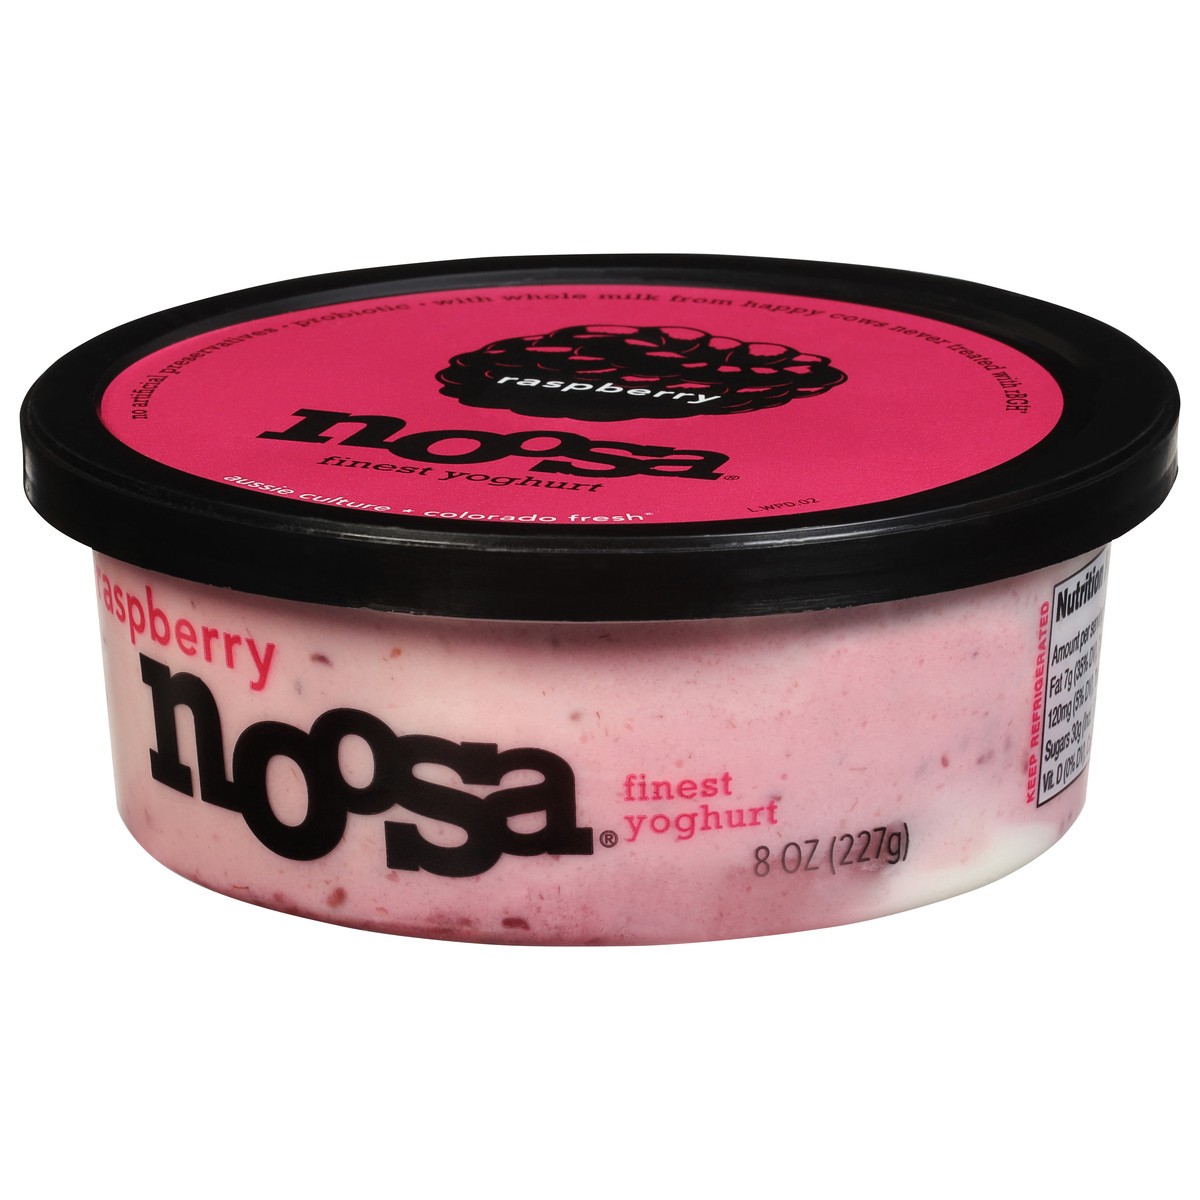 slide 7 of 9, noosa Yoghurt, Raspberry, 8 oz, Whole Milk Yogurt, Grade-A Pasteurized, Gluten Free, Probiotic, Made With the Finest Quality Ingredients, 8 oz